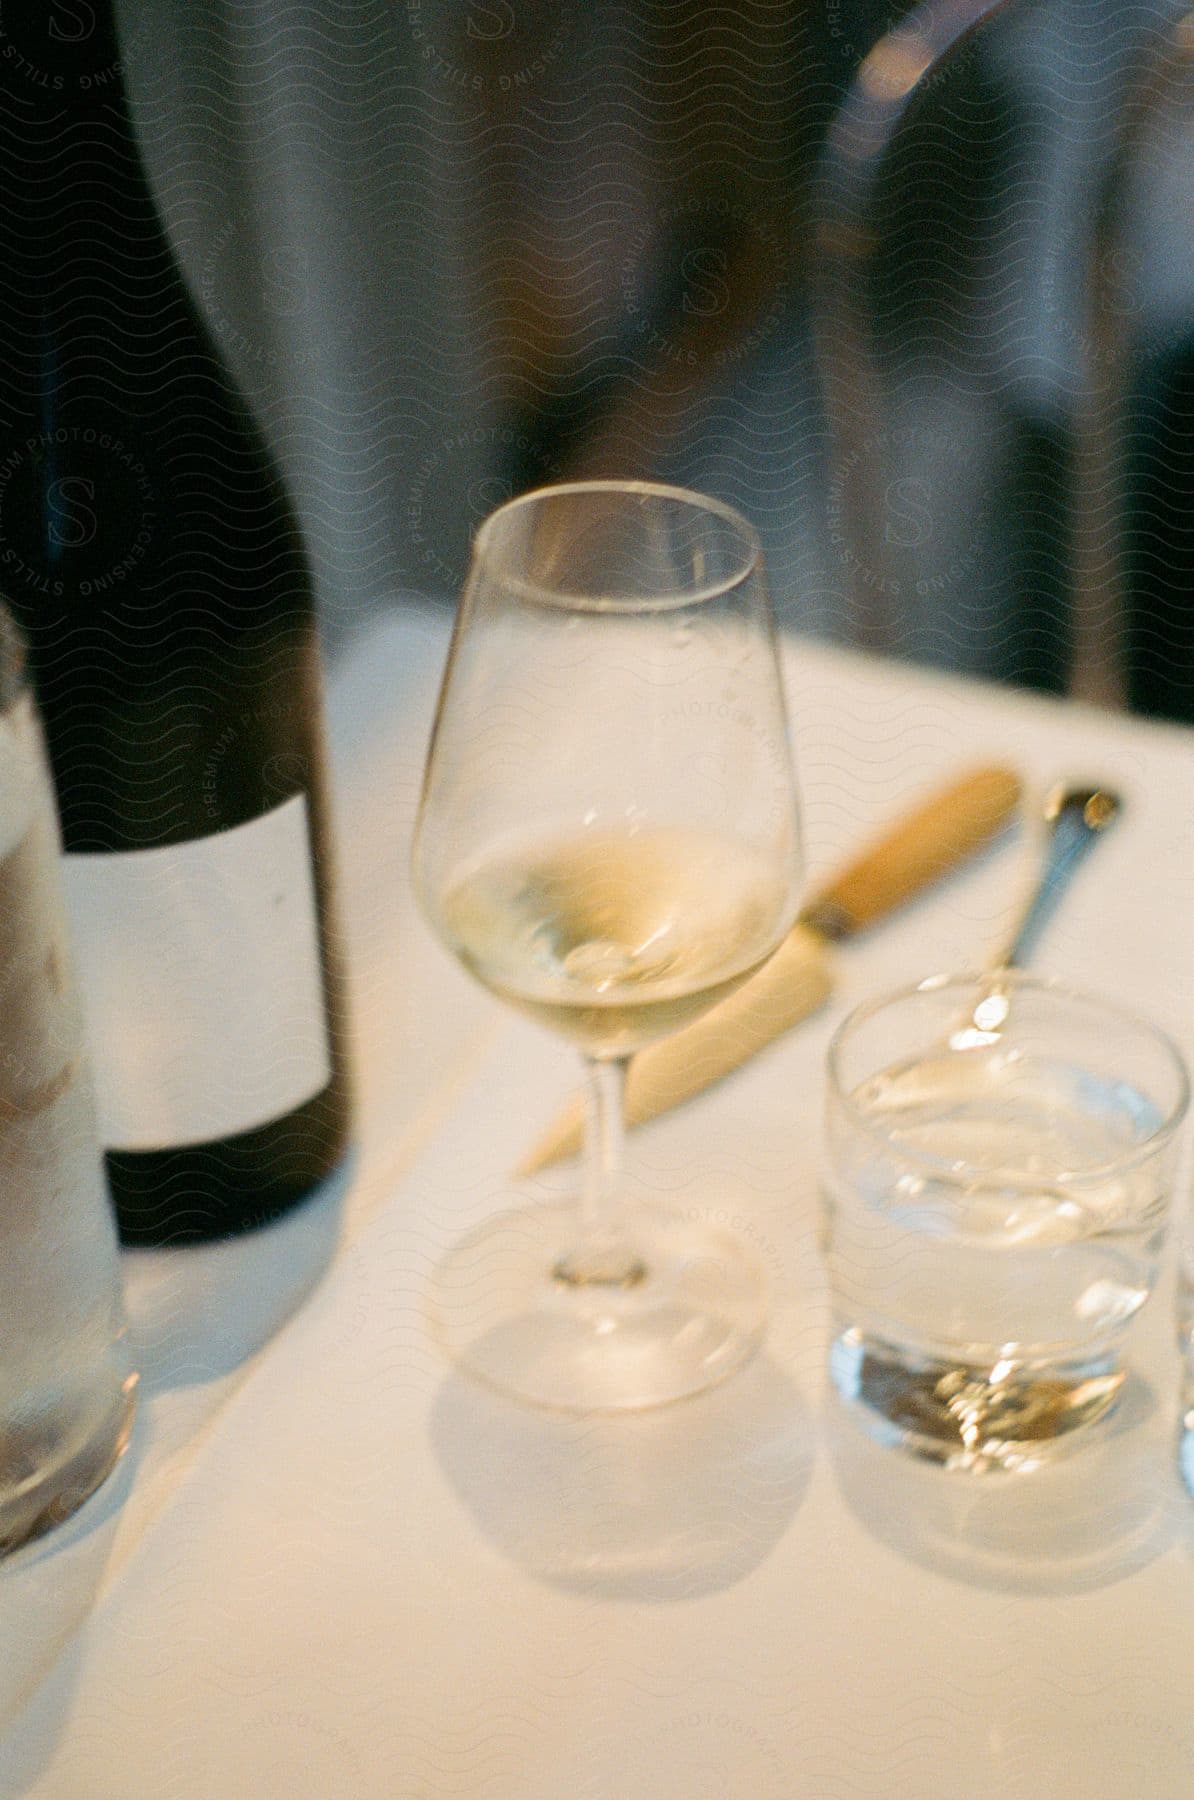 A wine bottle and two glasses are on a table beside a knife